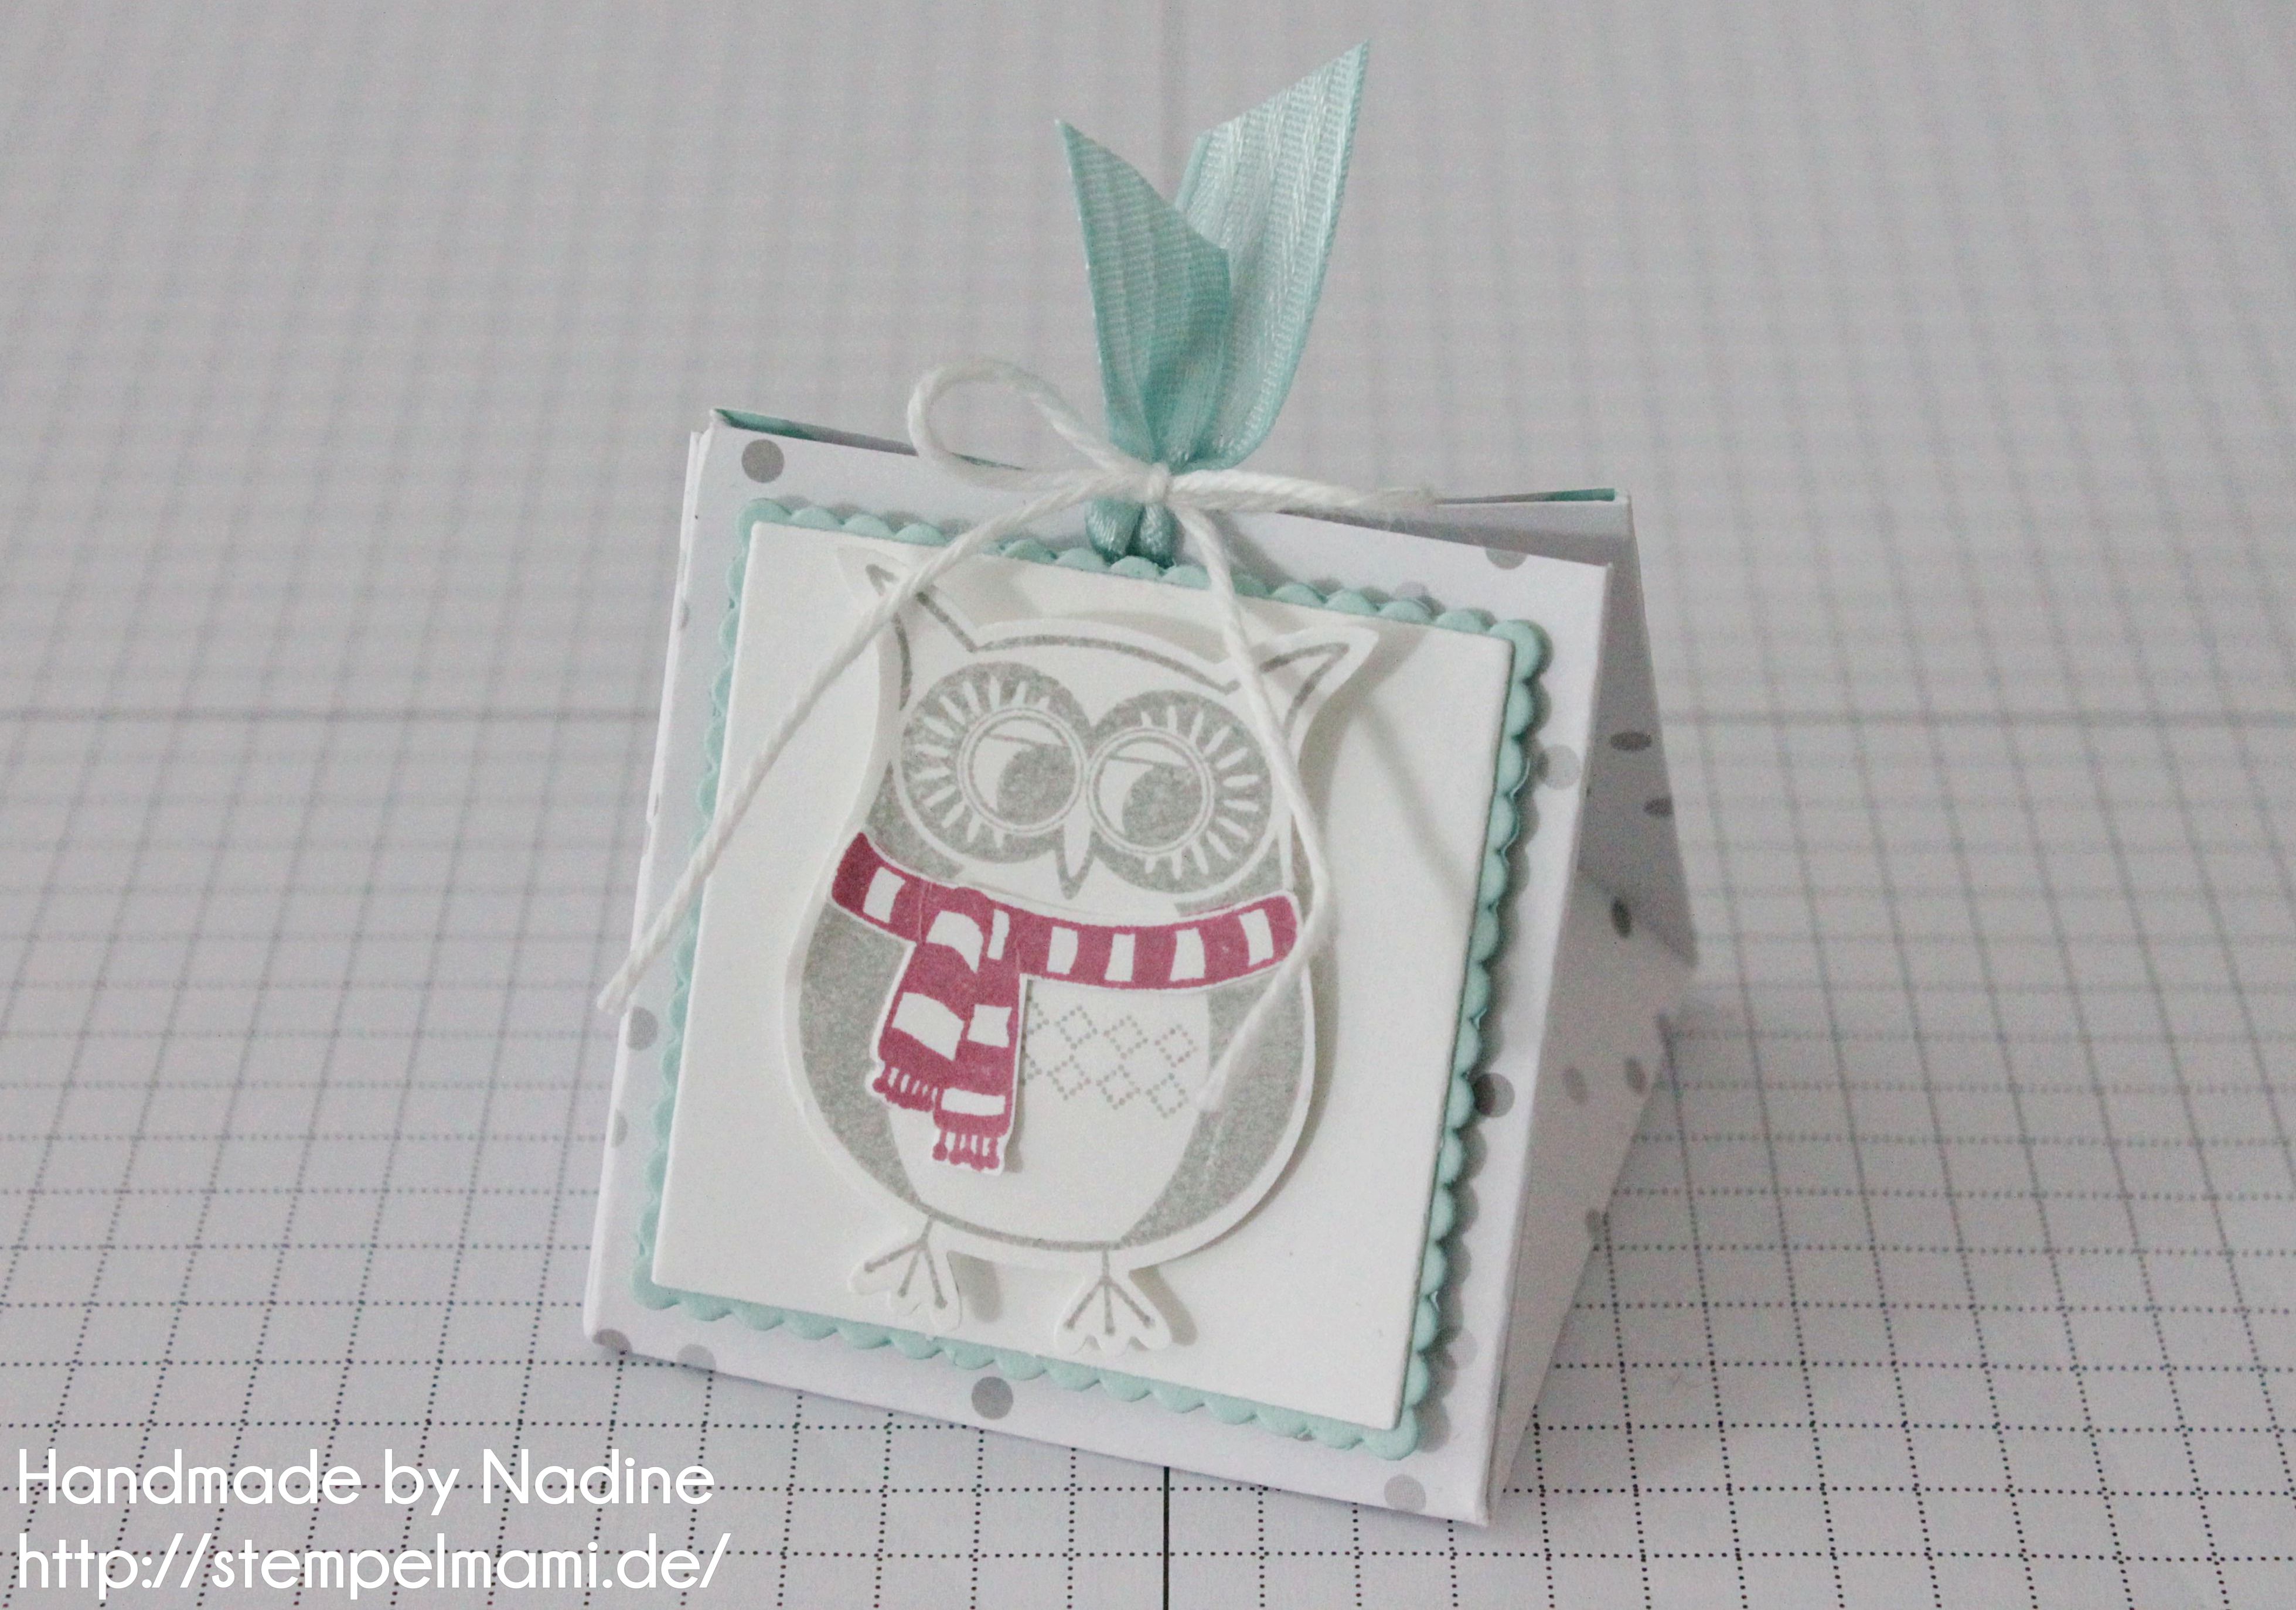 Stampin‘ Up! Anleitung Tutorial Explosion Purse Box, Schachtel, Goodie oder Give Away